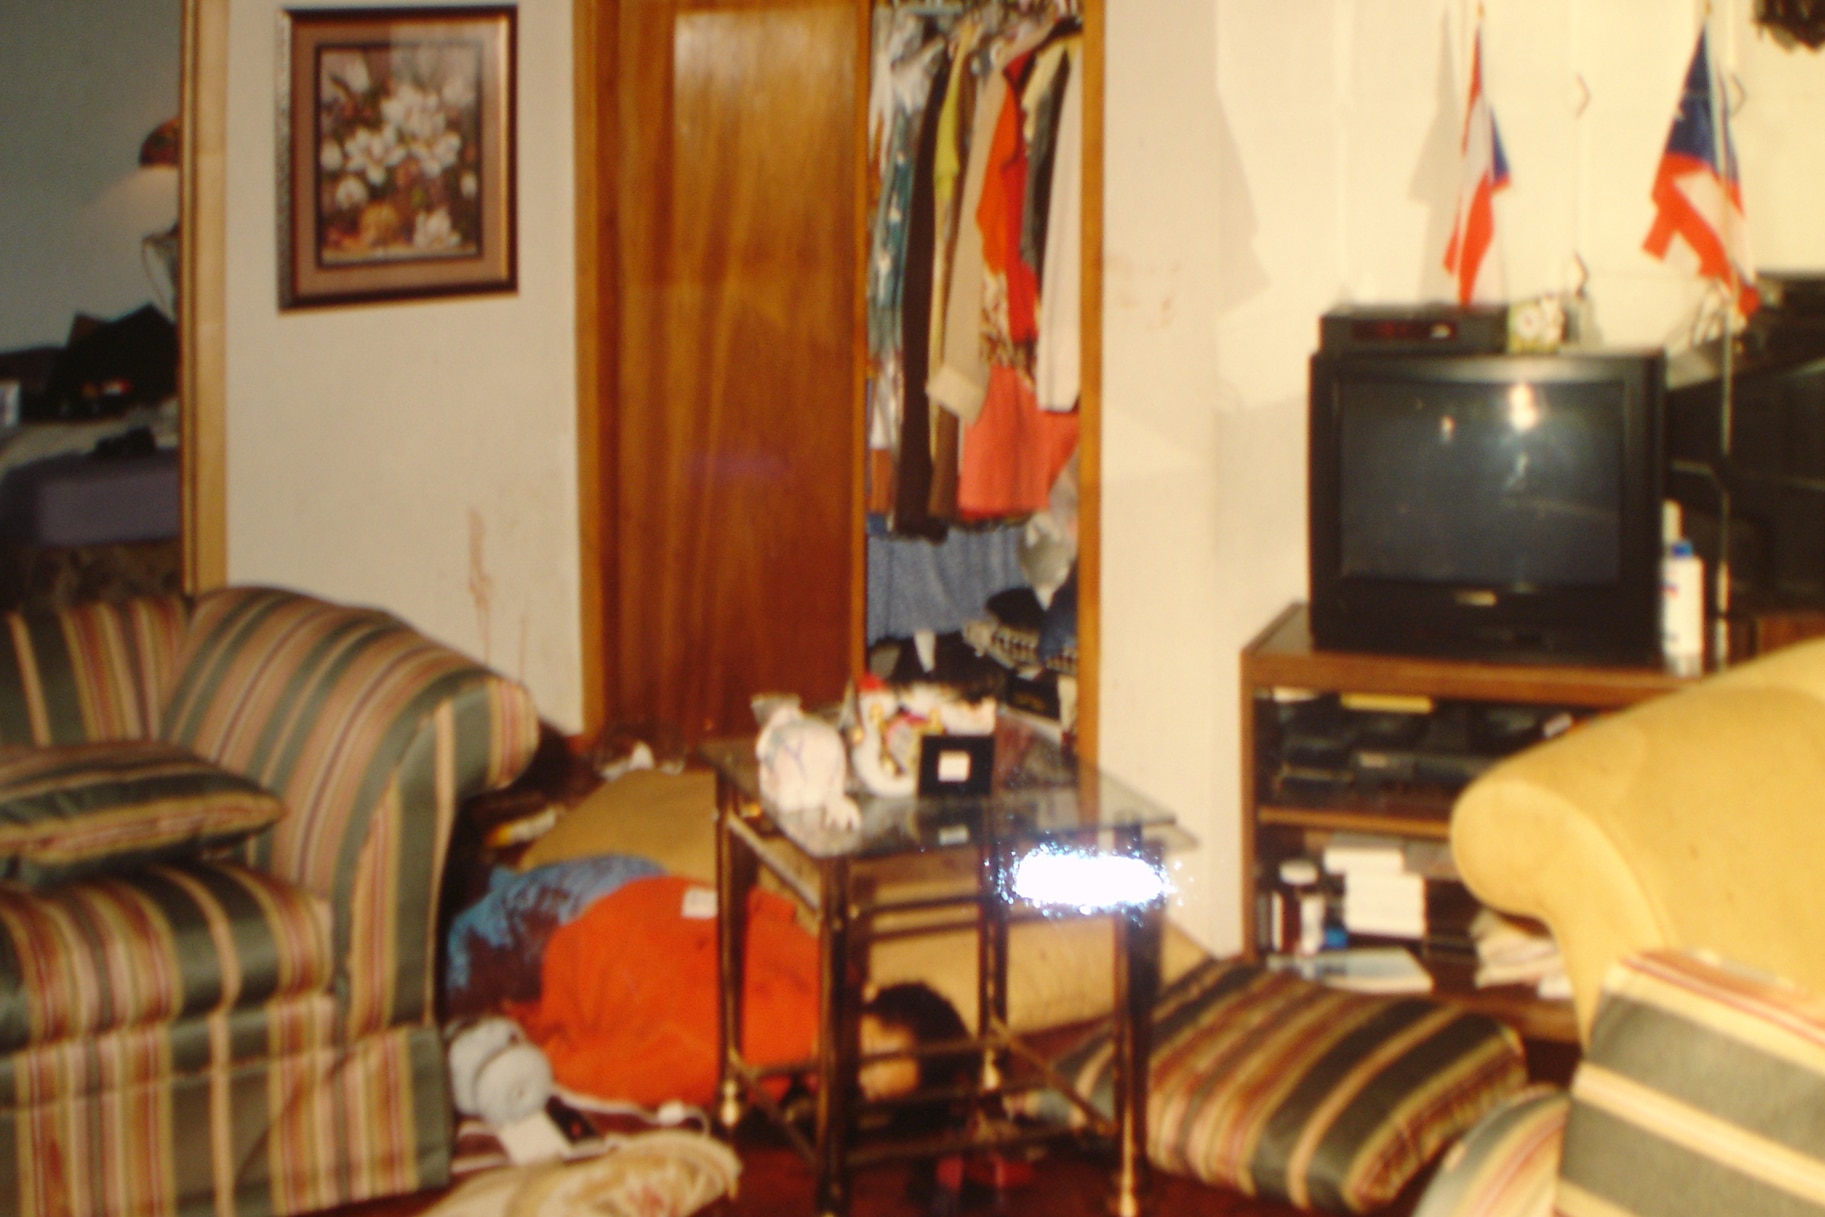 A crime scene photo of a ransacked apartment on New York Homicide